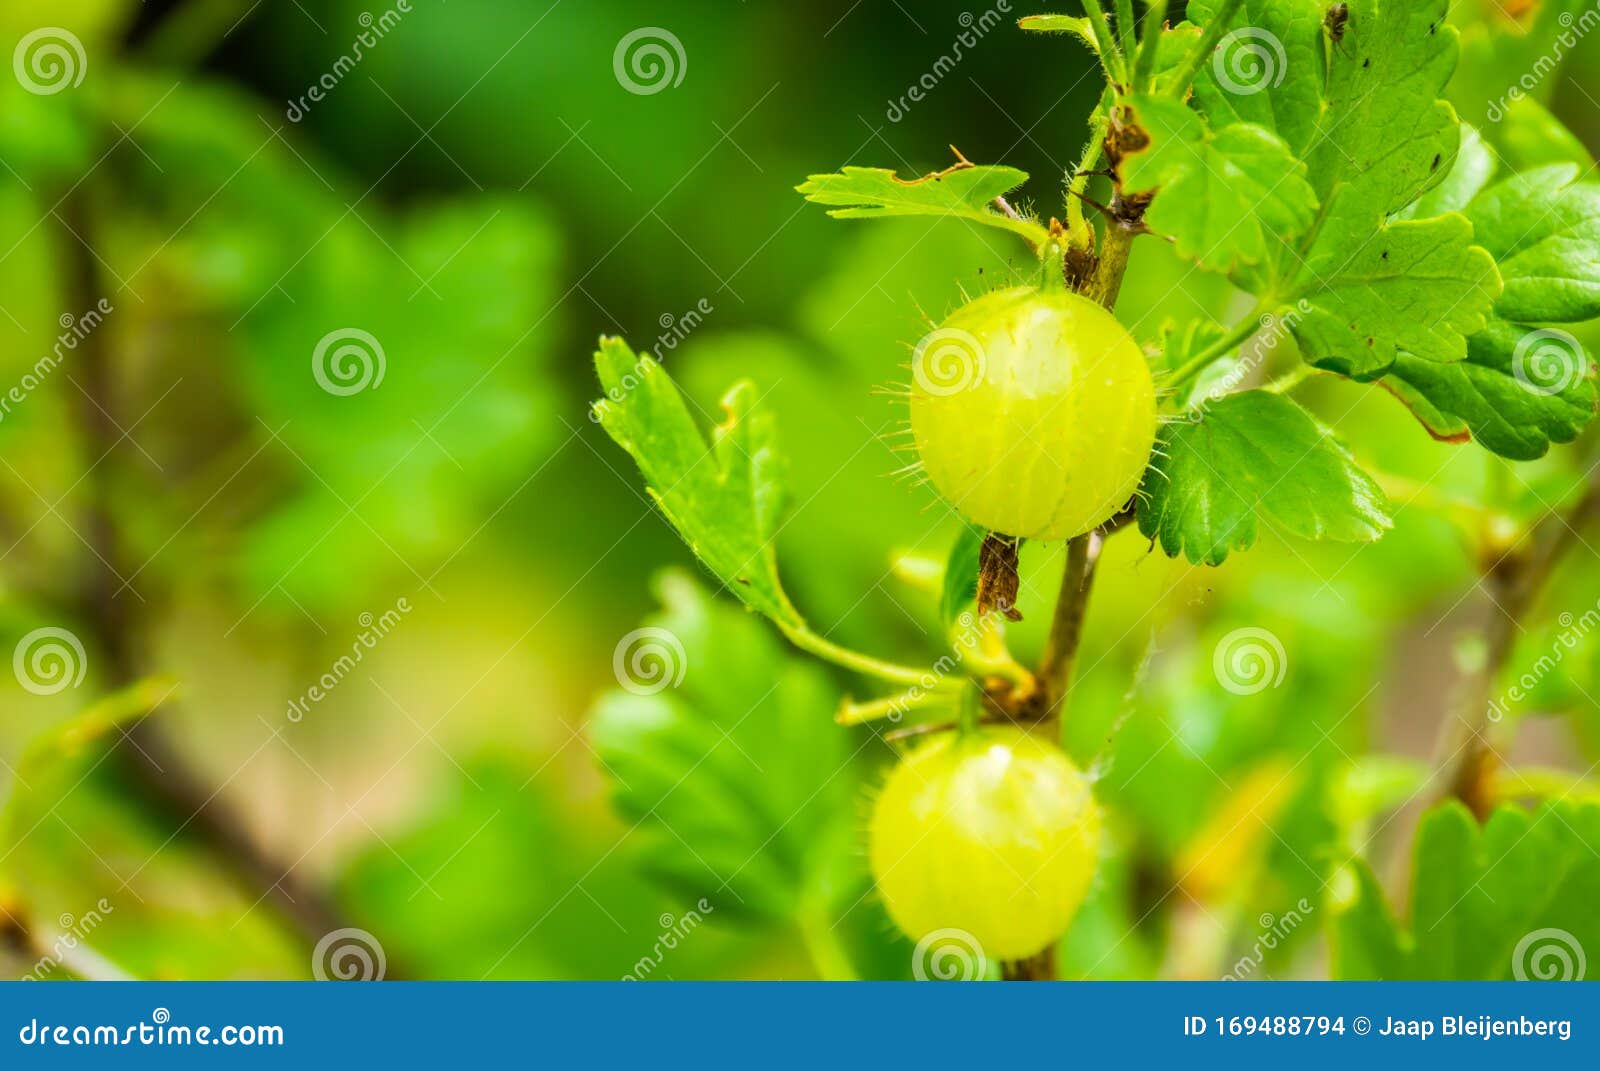 gooseberries on a gooseberry plant in closeup, popular fruiting plant specie from europe and africa